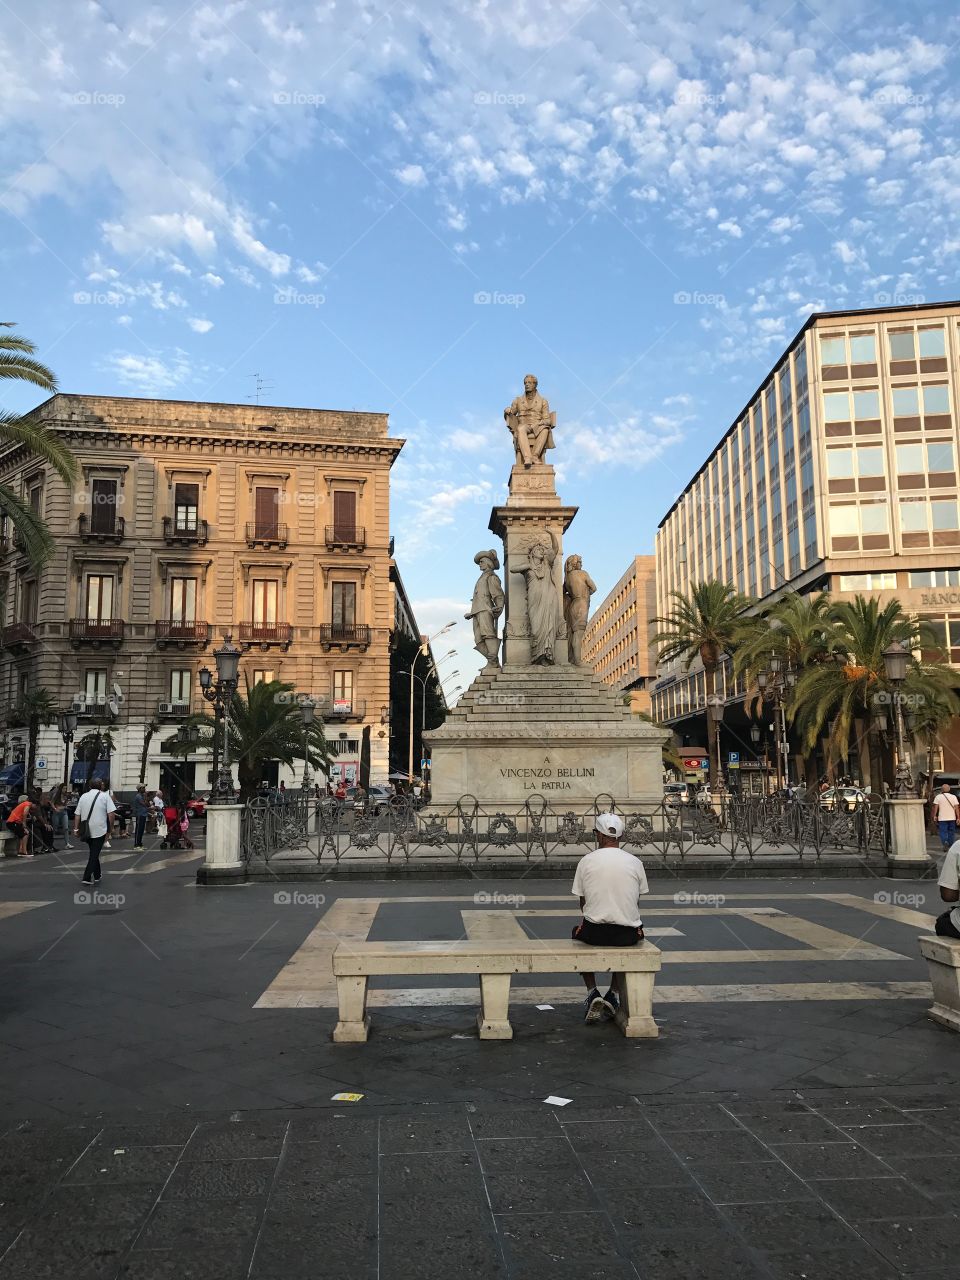 Looking to a monument/Catania